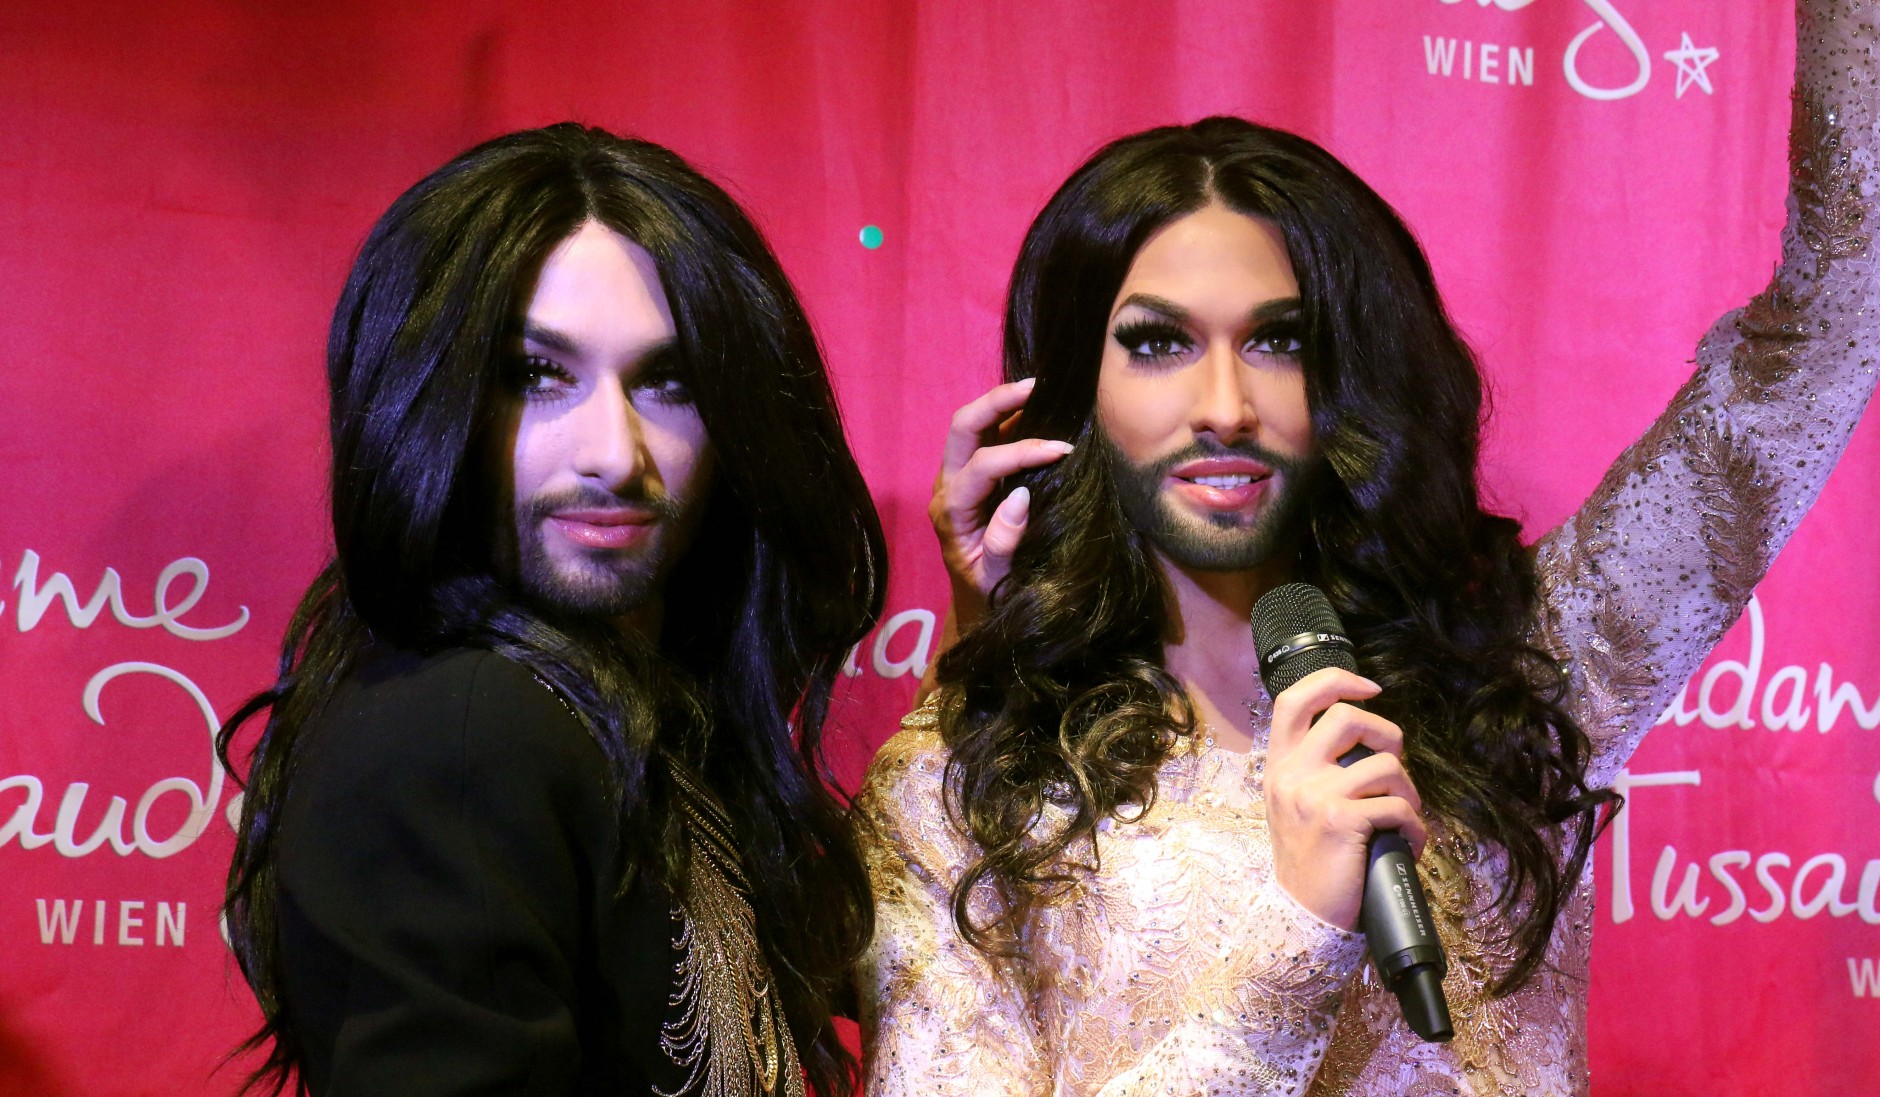 Conchita Wurst, Austrian winner of the Eurovision Song Contest 2014, left, unveils his wax figure at Madame Tussauds in Vienna, Austria, Tuesday, May 12, 2015.  (AP Photo/Ronald Zak)